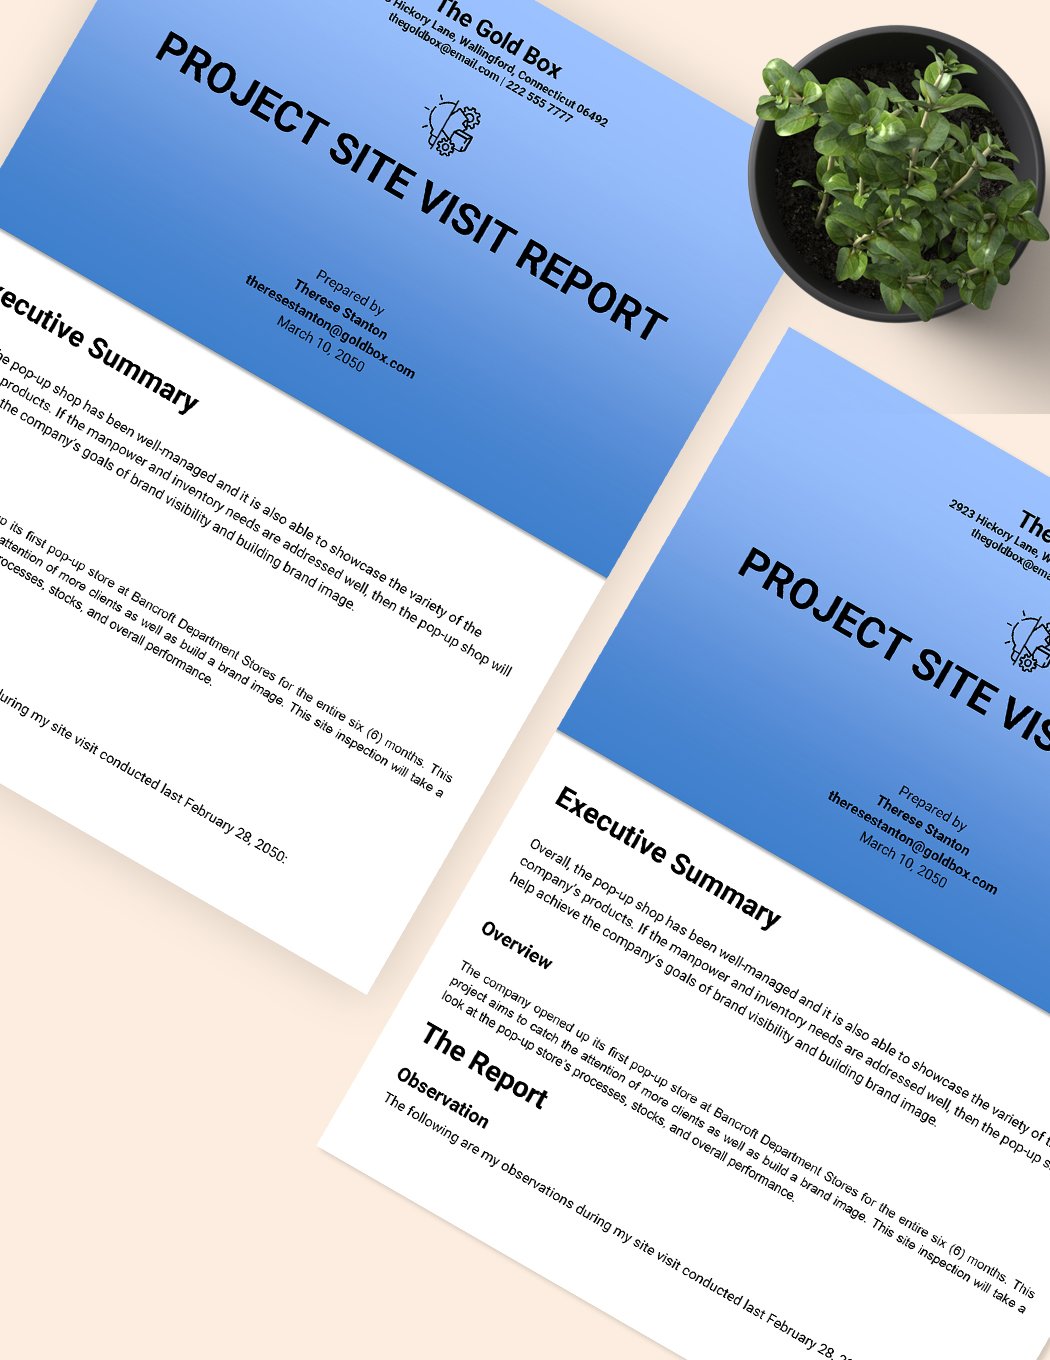 Free Project Site Visit Report Template